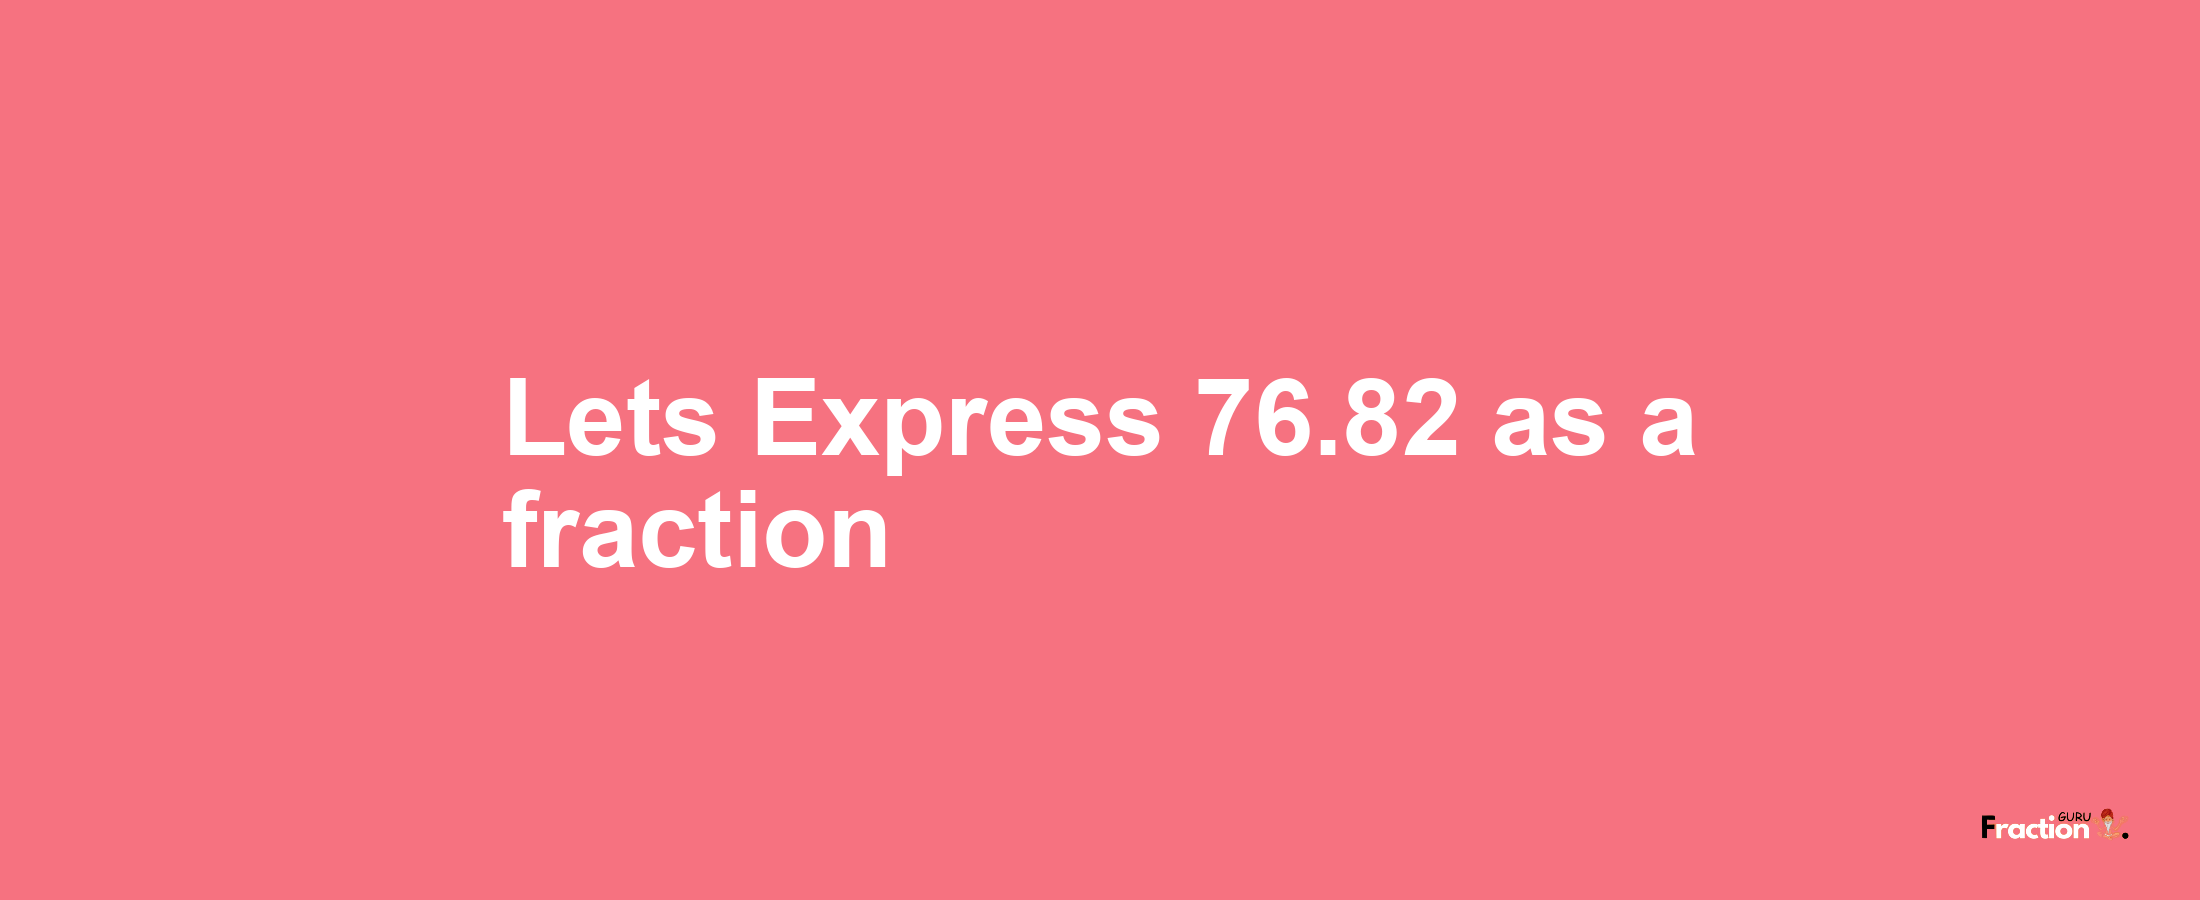 Lets Express 76.82 as afraction